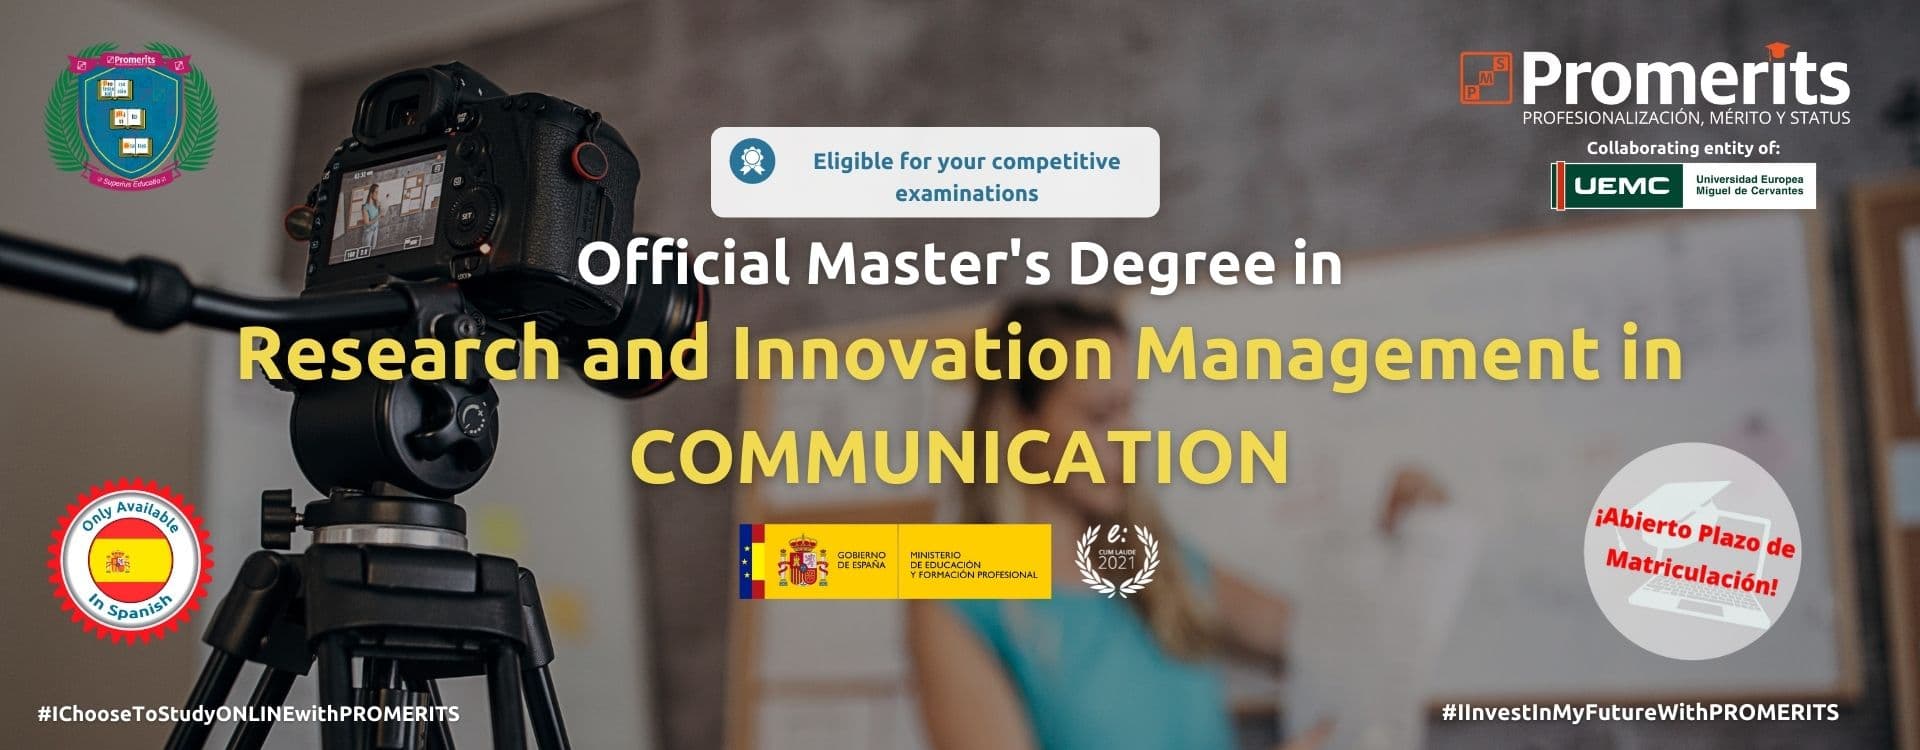 Official Master's Degree in Research and Innovation Management in Communication